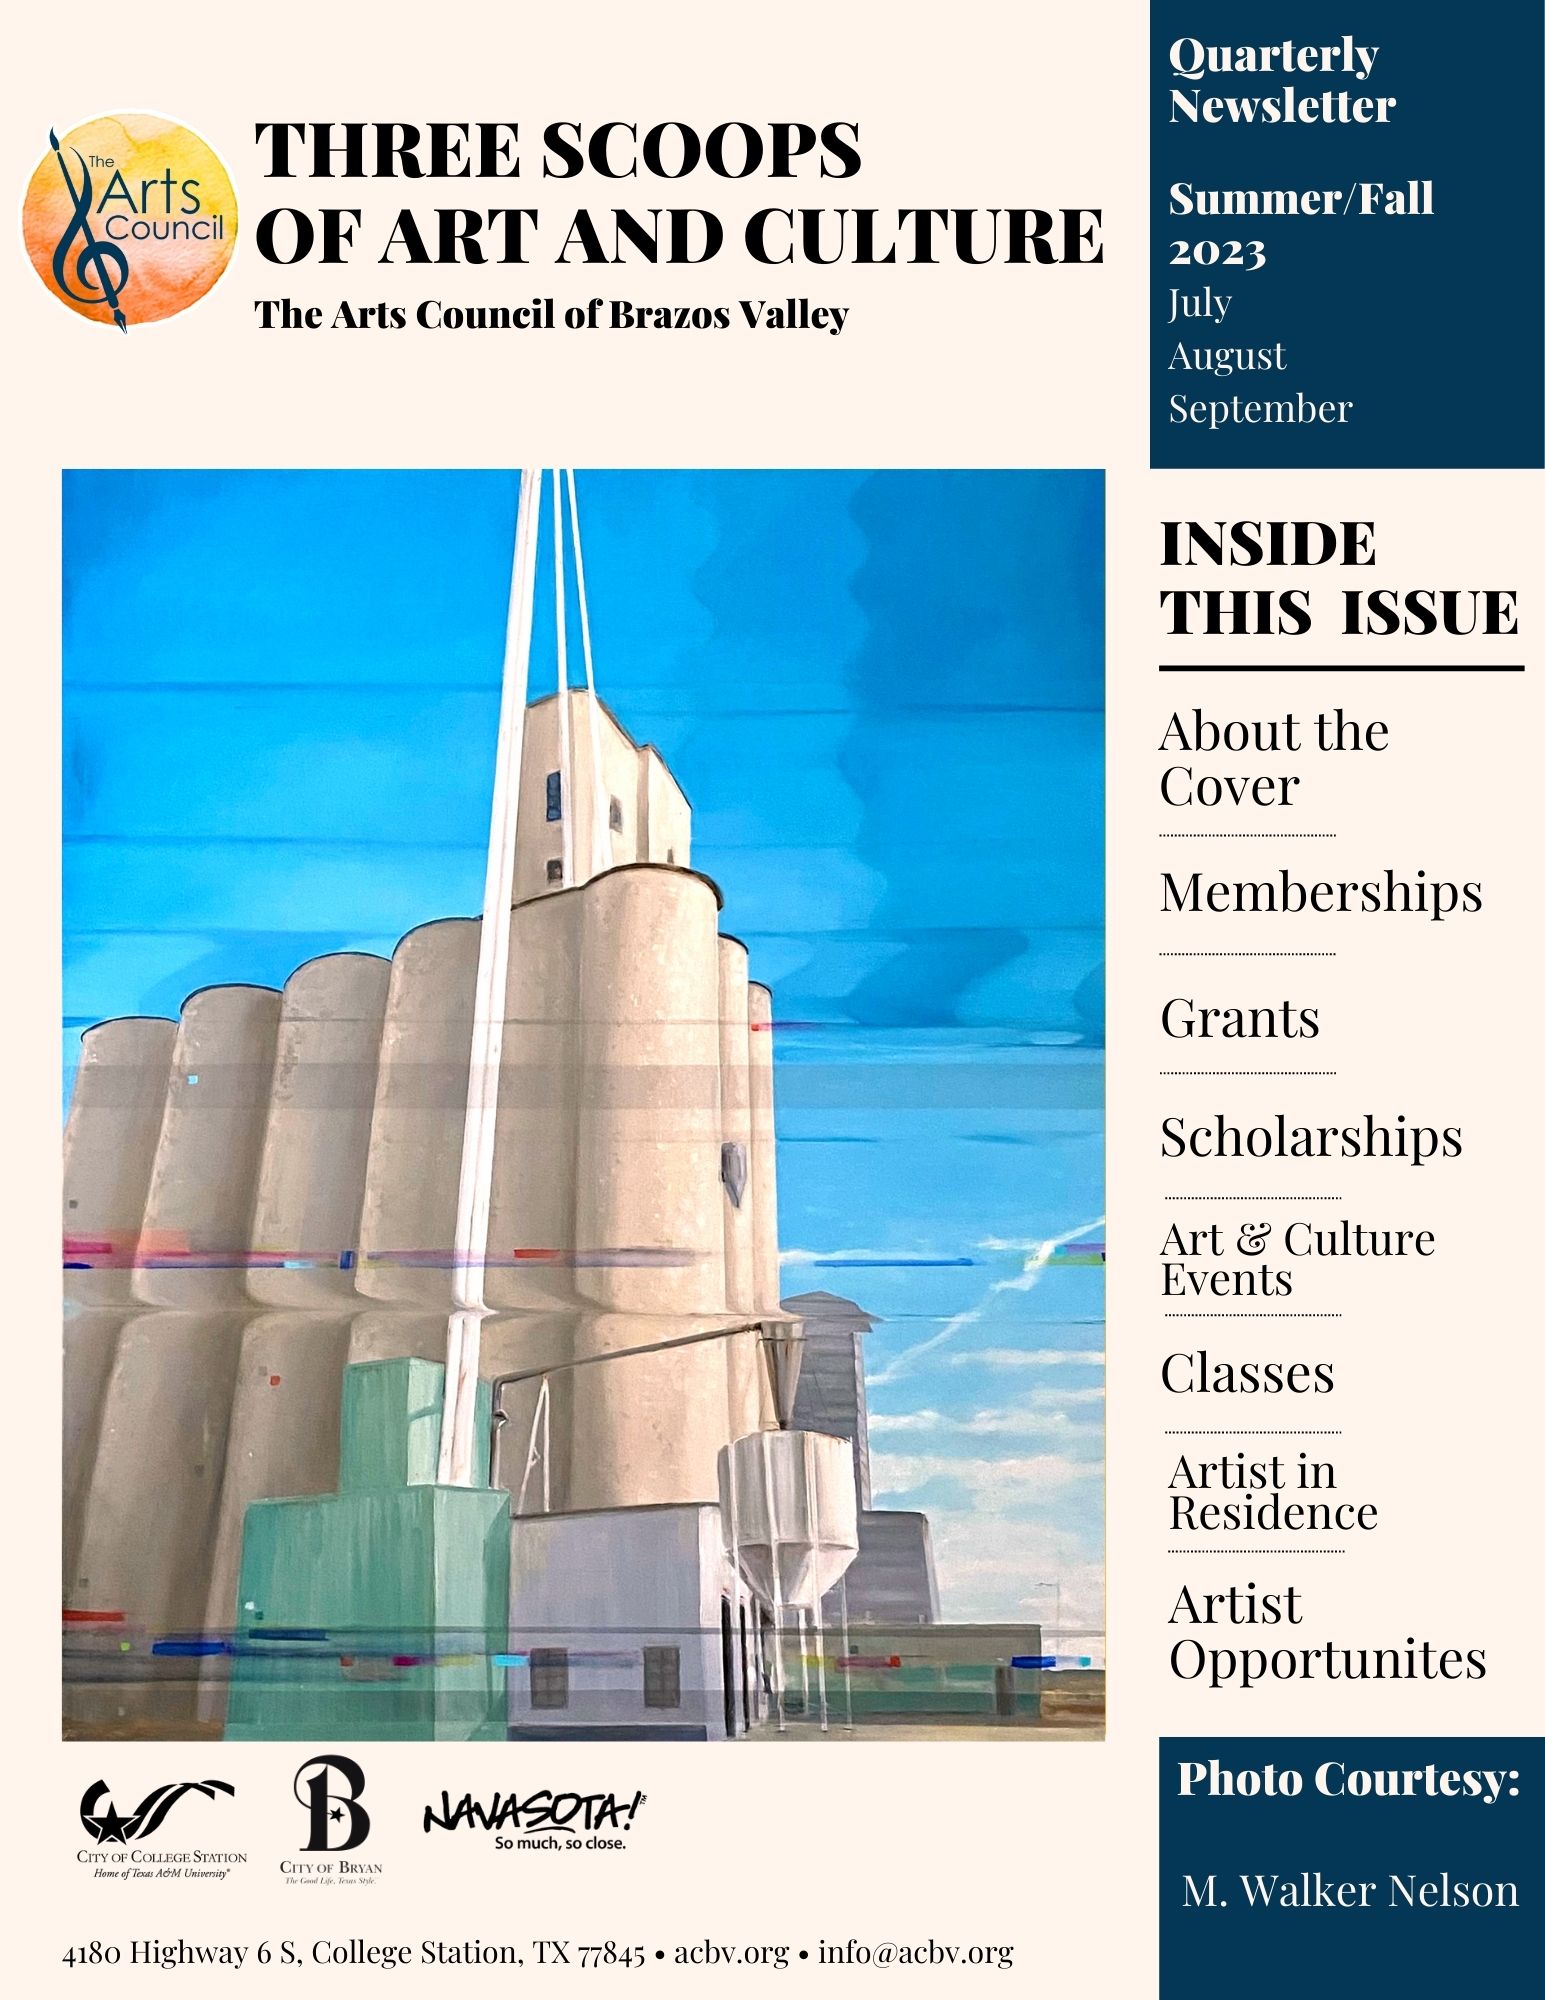 Cover of the Arts Council of the Brazos Valley's Summer/Fall issue quarterly newsletter titled 'Three Scoops of Art and Culture'